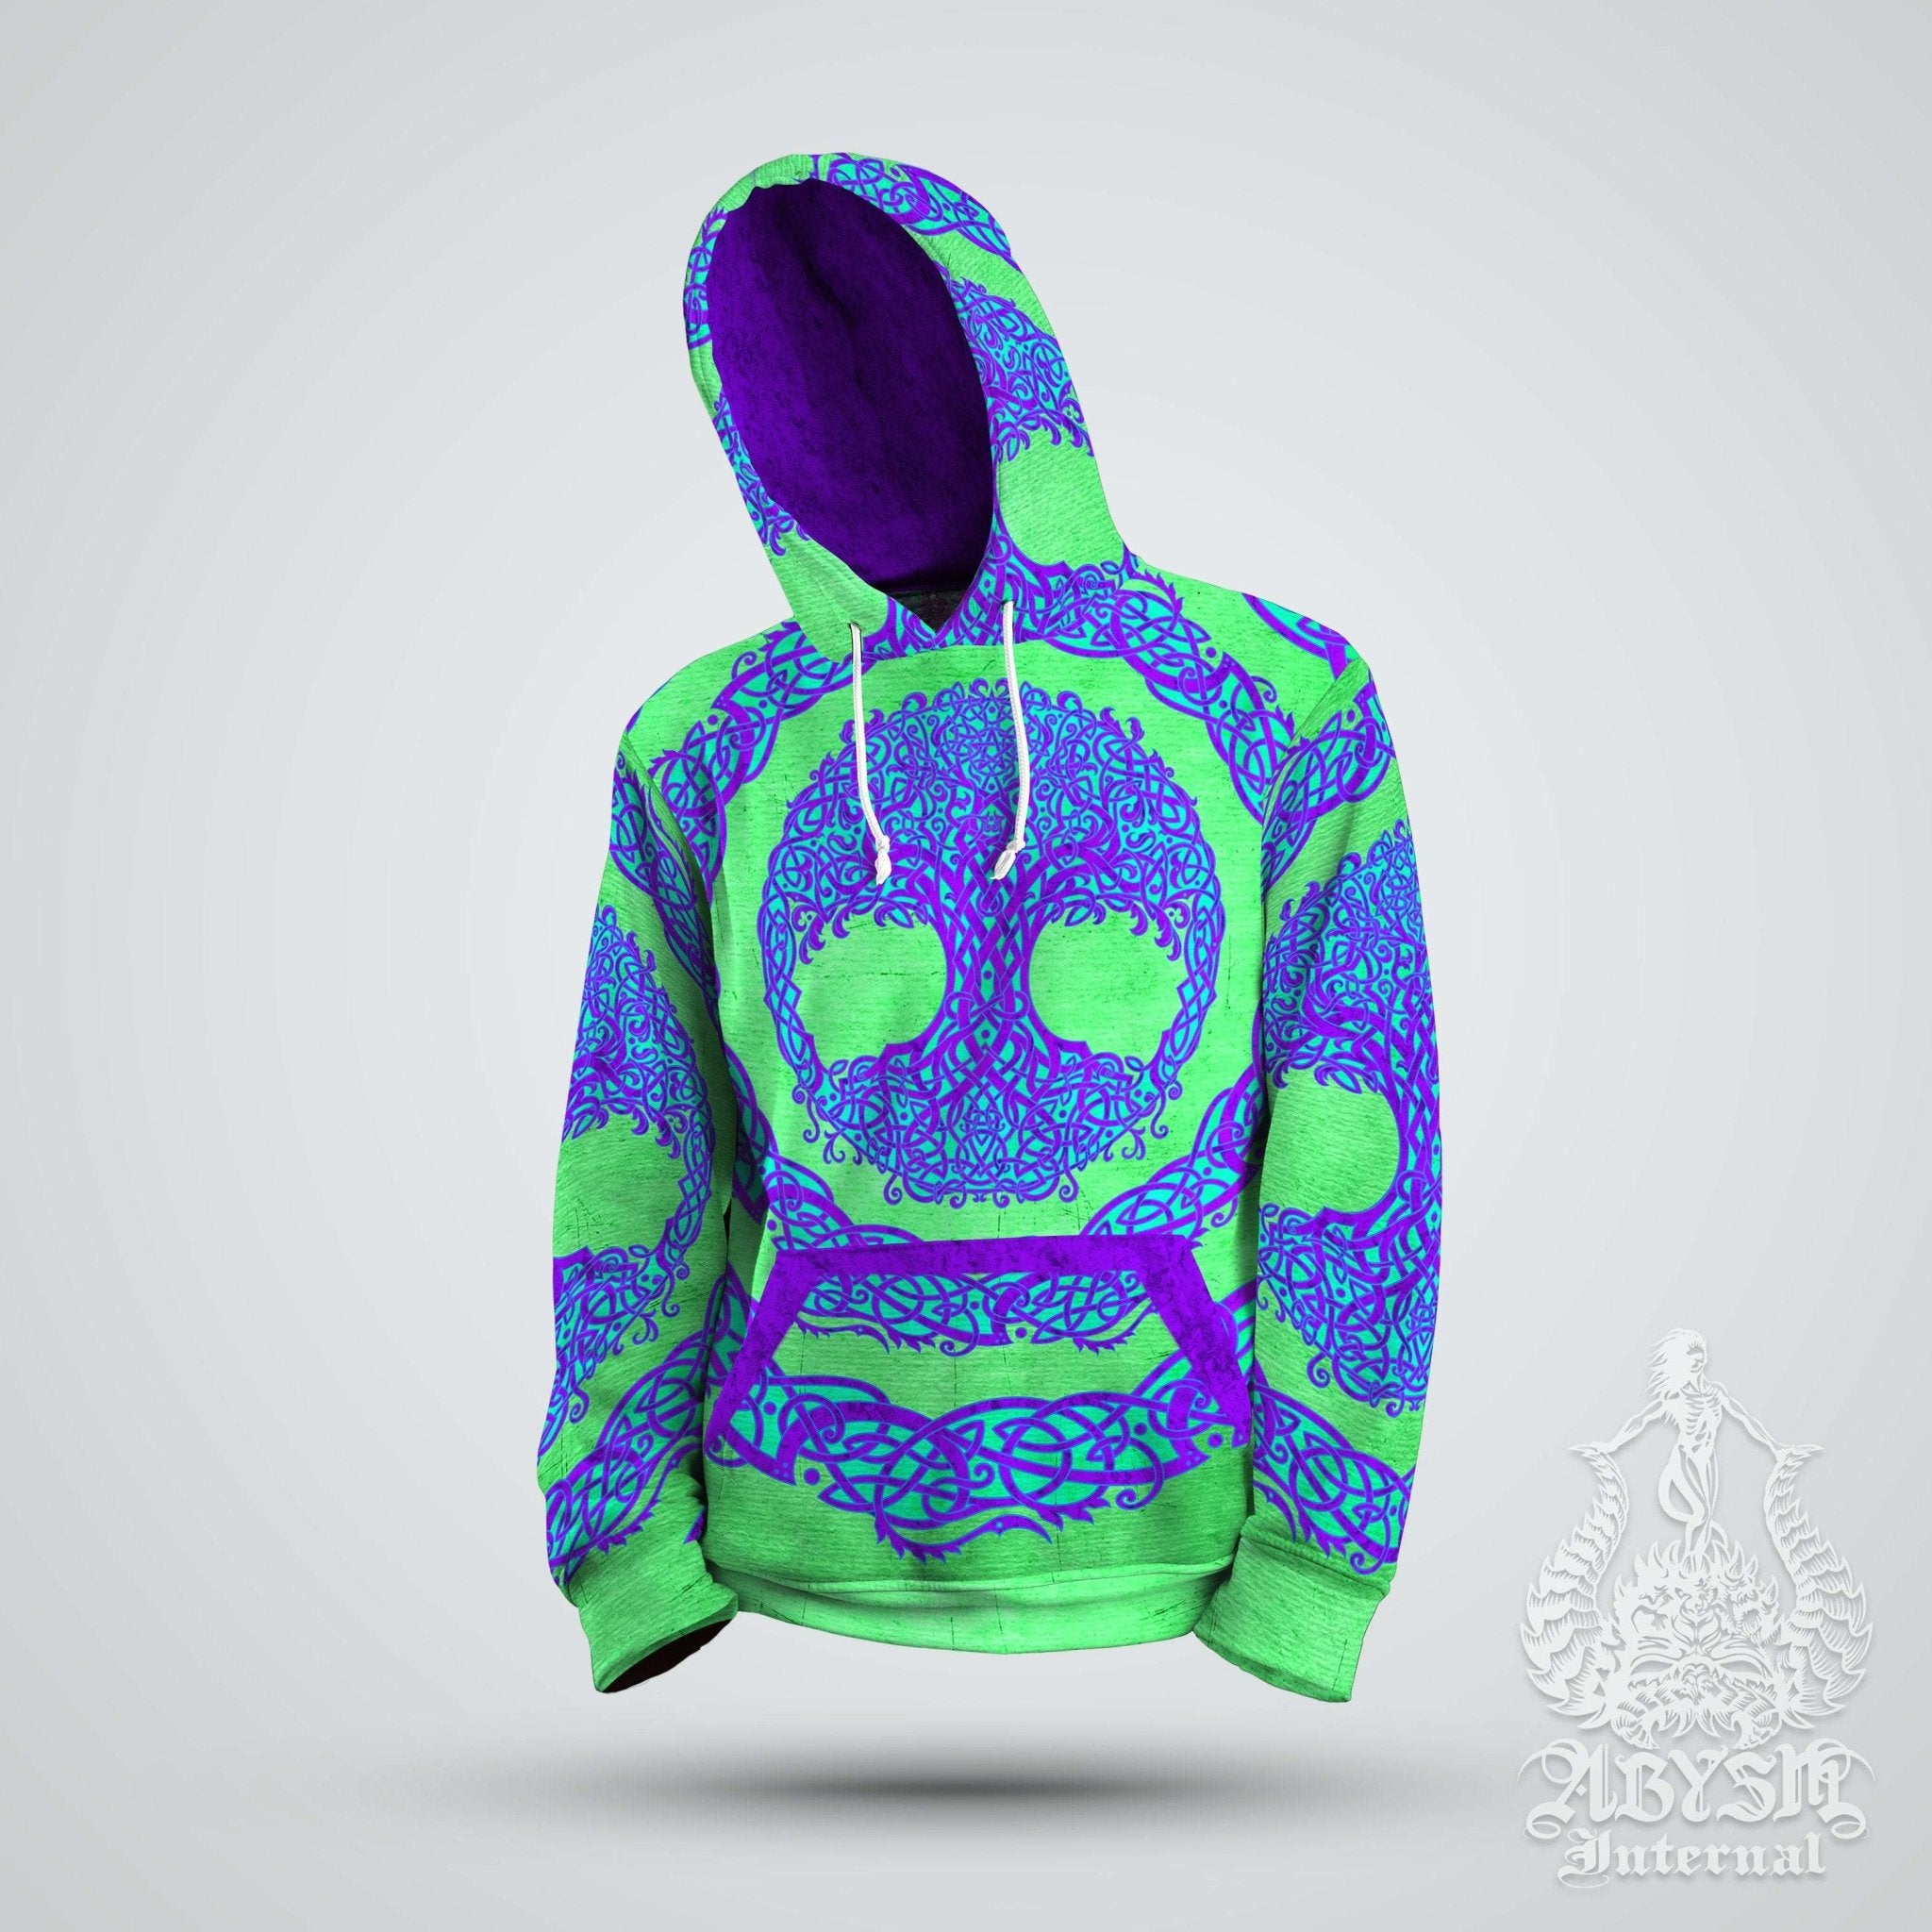 Trippy Hoodie, Rave Outfit, Psychedelic Festival Sweater, Witchy Streetwear, Alternative Clothing, Unisex - Psy, Celtic Tree of Life - Abysm Internal